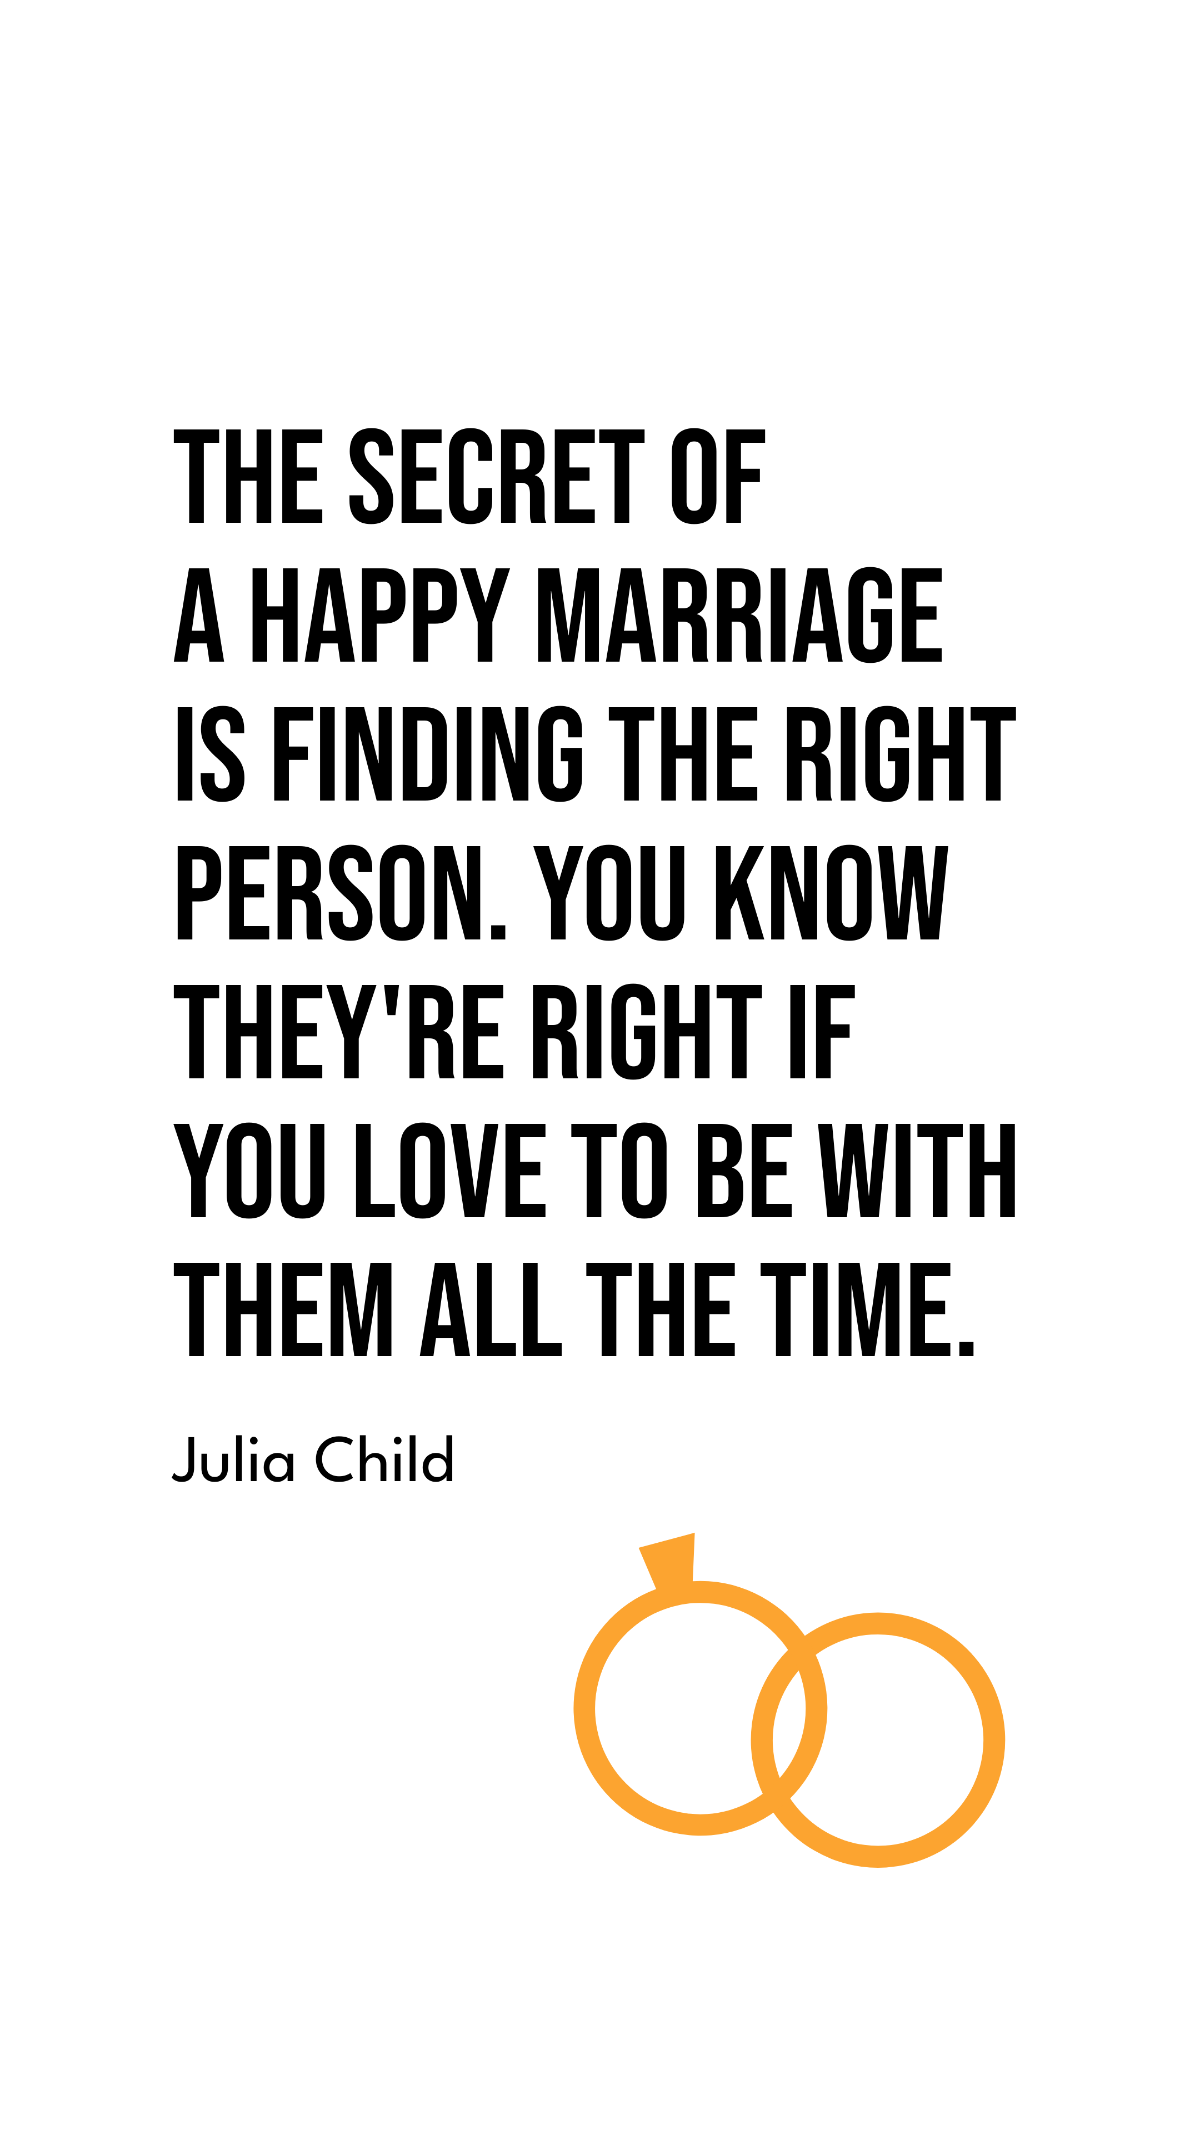 Julia Child - The secret of a happy marriage is finding the right person. You know they're right if you love to be with them all the time.